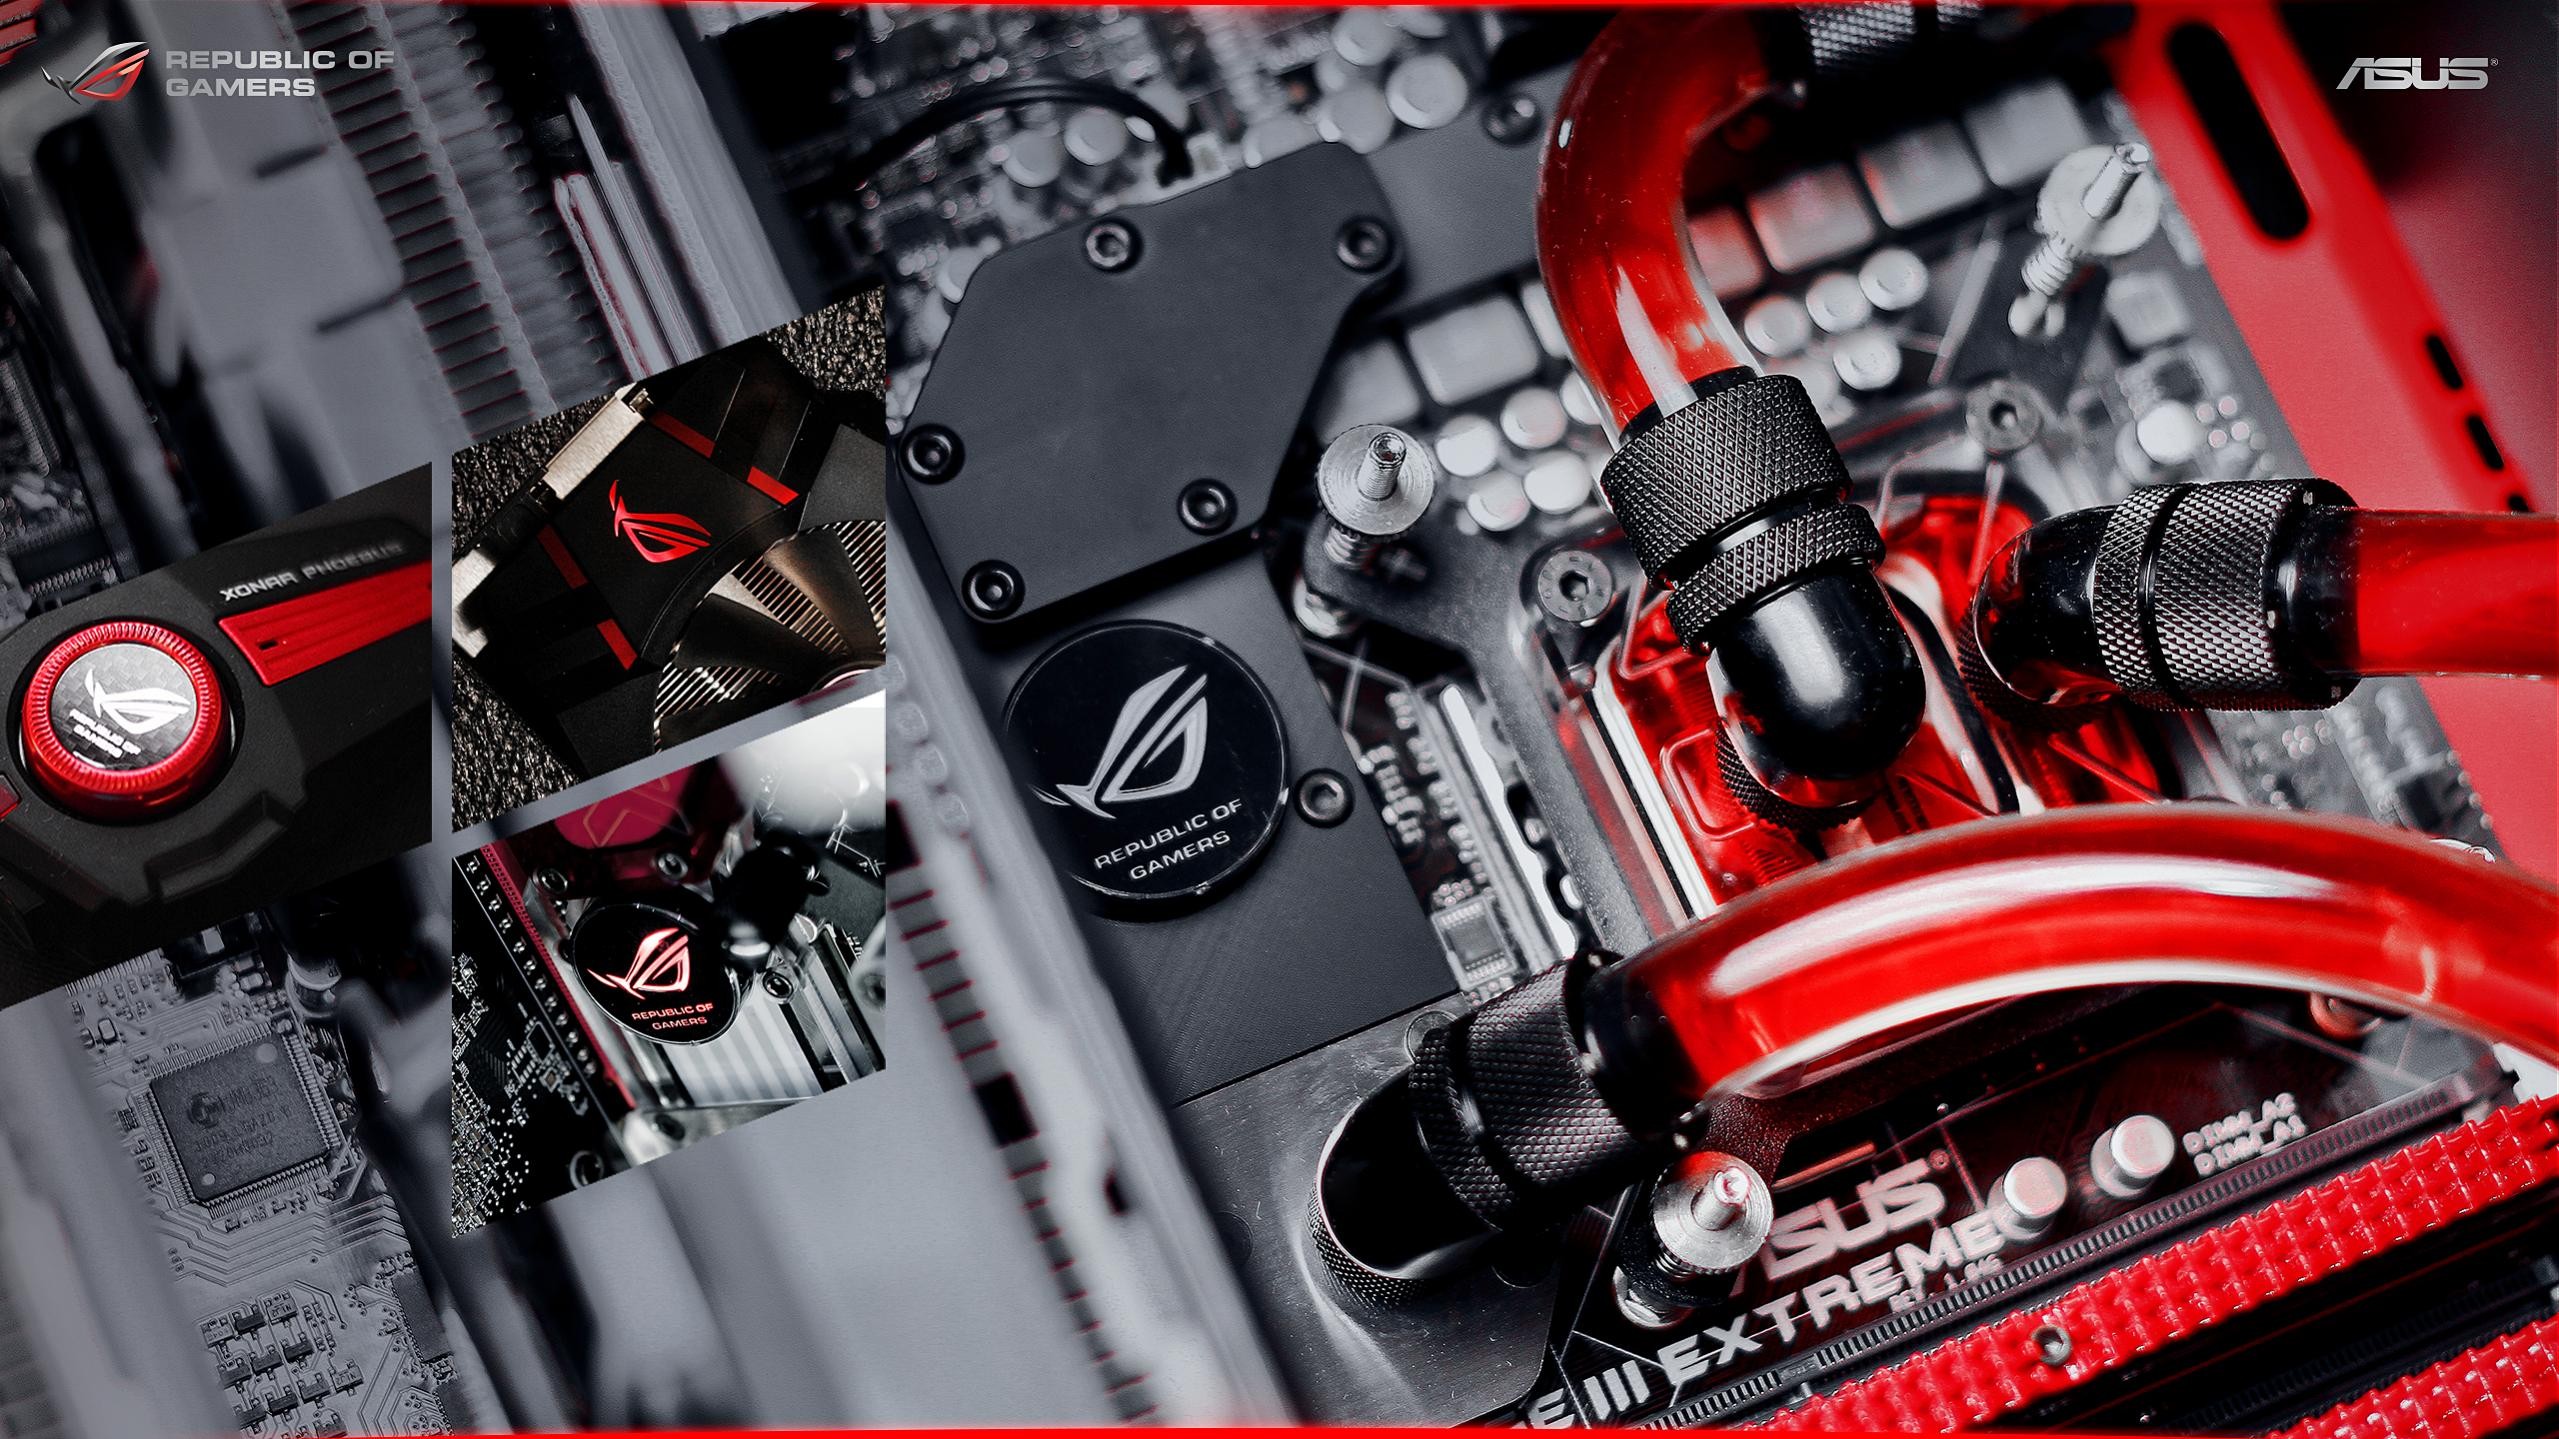 General 2559x1439 Republic of Gamers ASUS PC gaming motherboards liquid cooling closeup watermarked